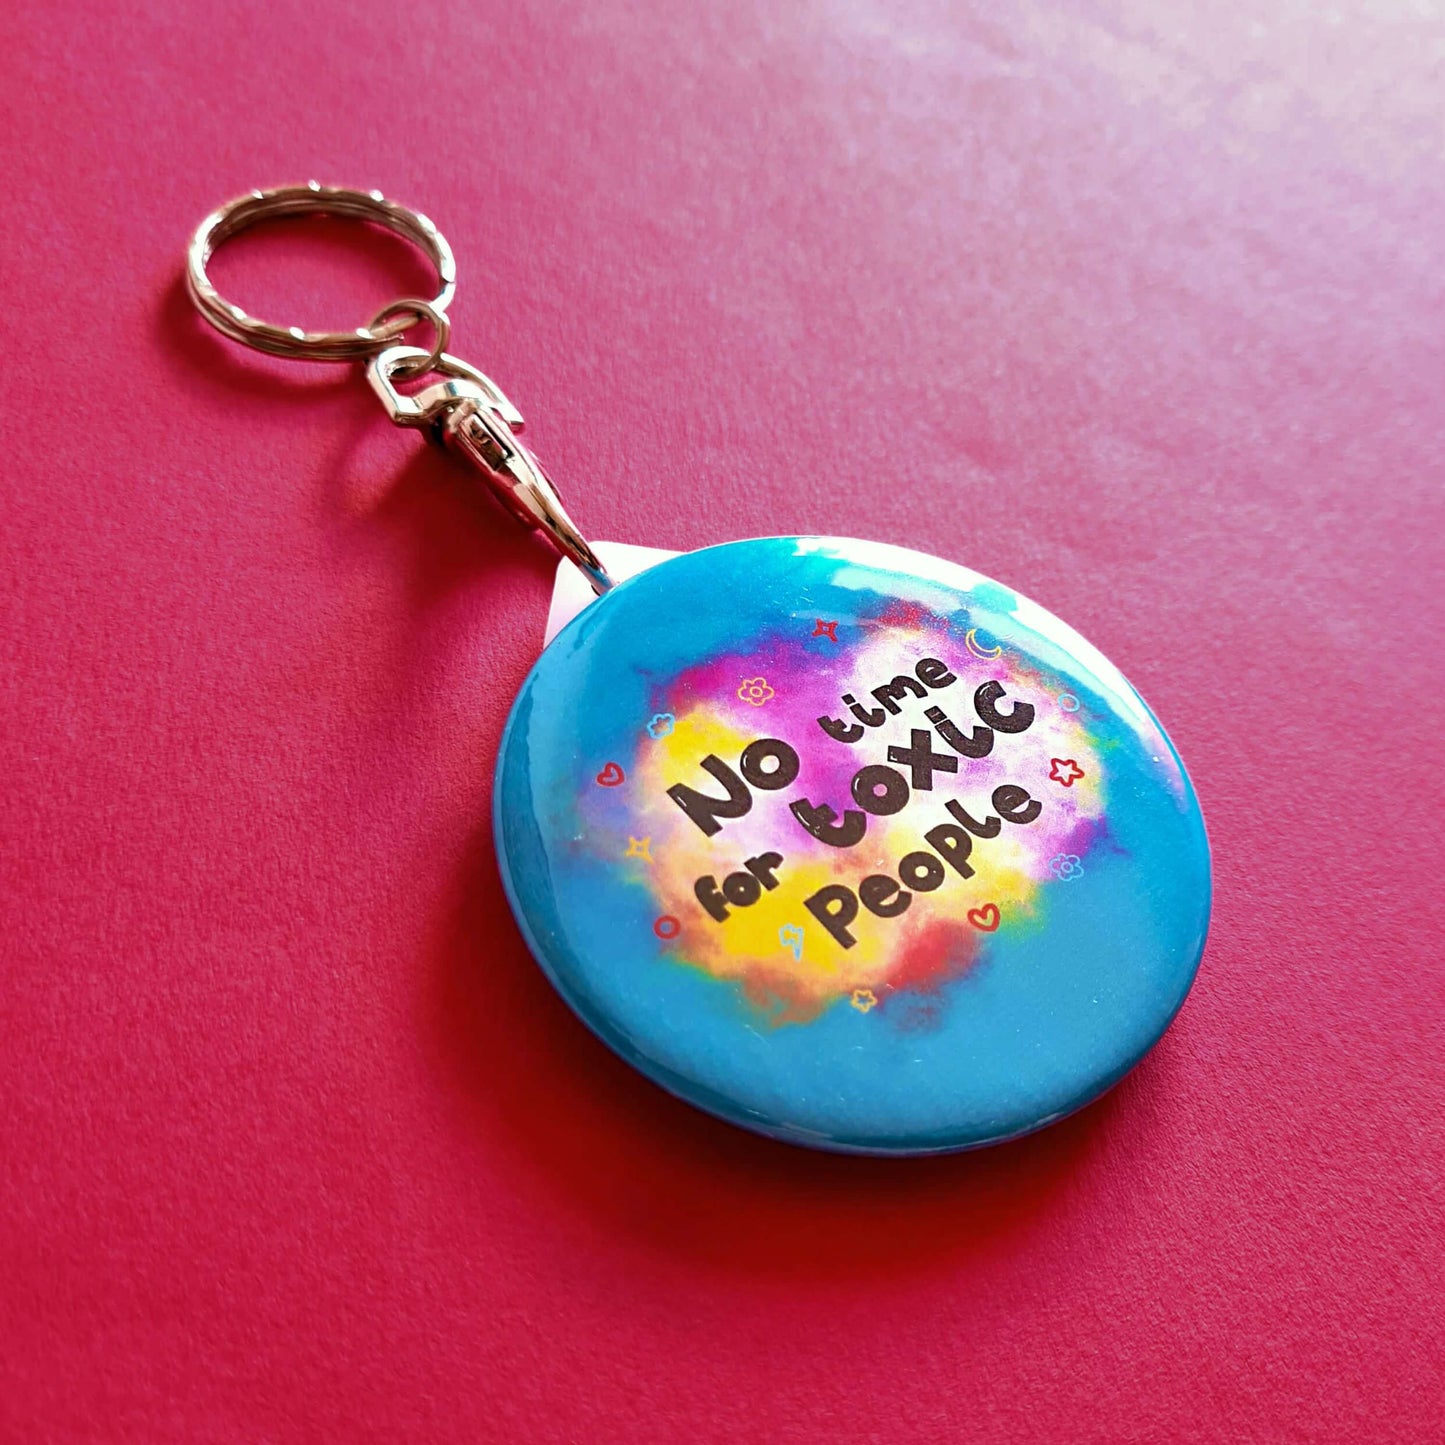 The No Time For Toxic People Keyring on a red background. The silver lobster clip blue plastic circular keychain has yellow and pink clouds with black text reading 'no time for toxic people' with red, yellow, and blue hearts, clouds, sparkles, moons and flowers.